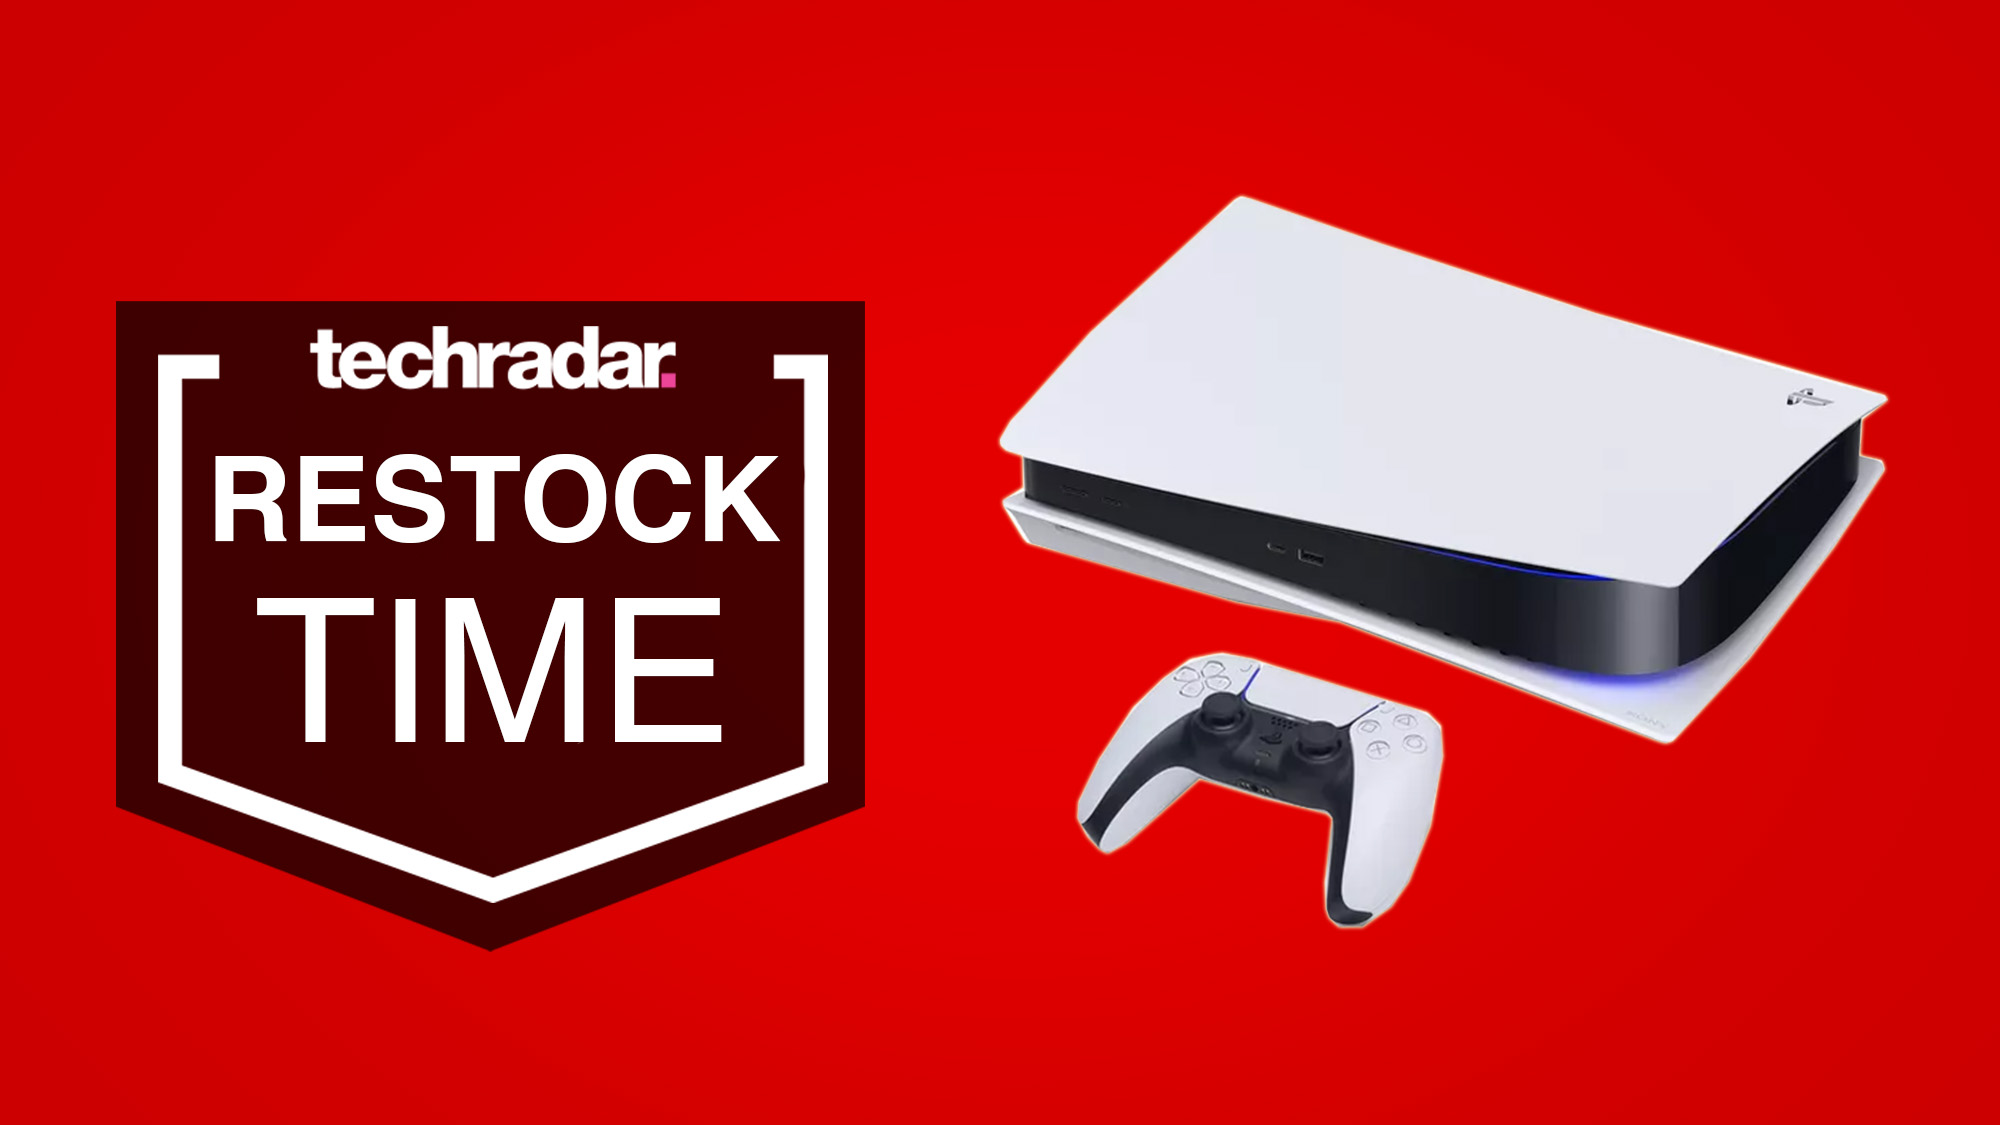 Target Ps5 Restock Its Not In Stock Today At Target What Time To Buy Ps5 Next Techradar